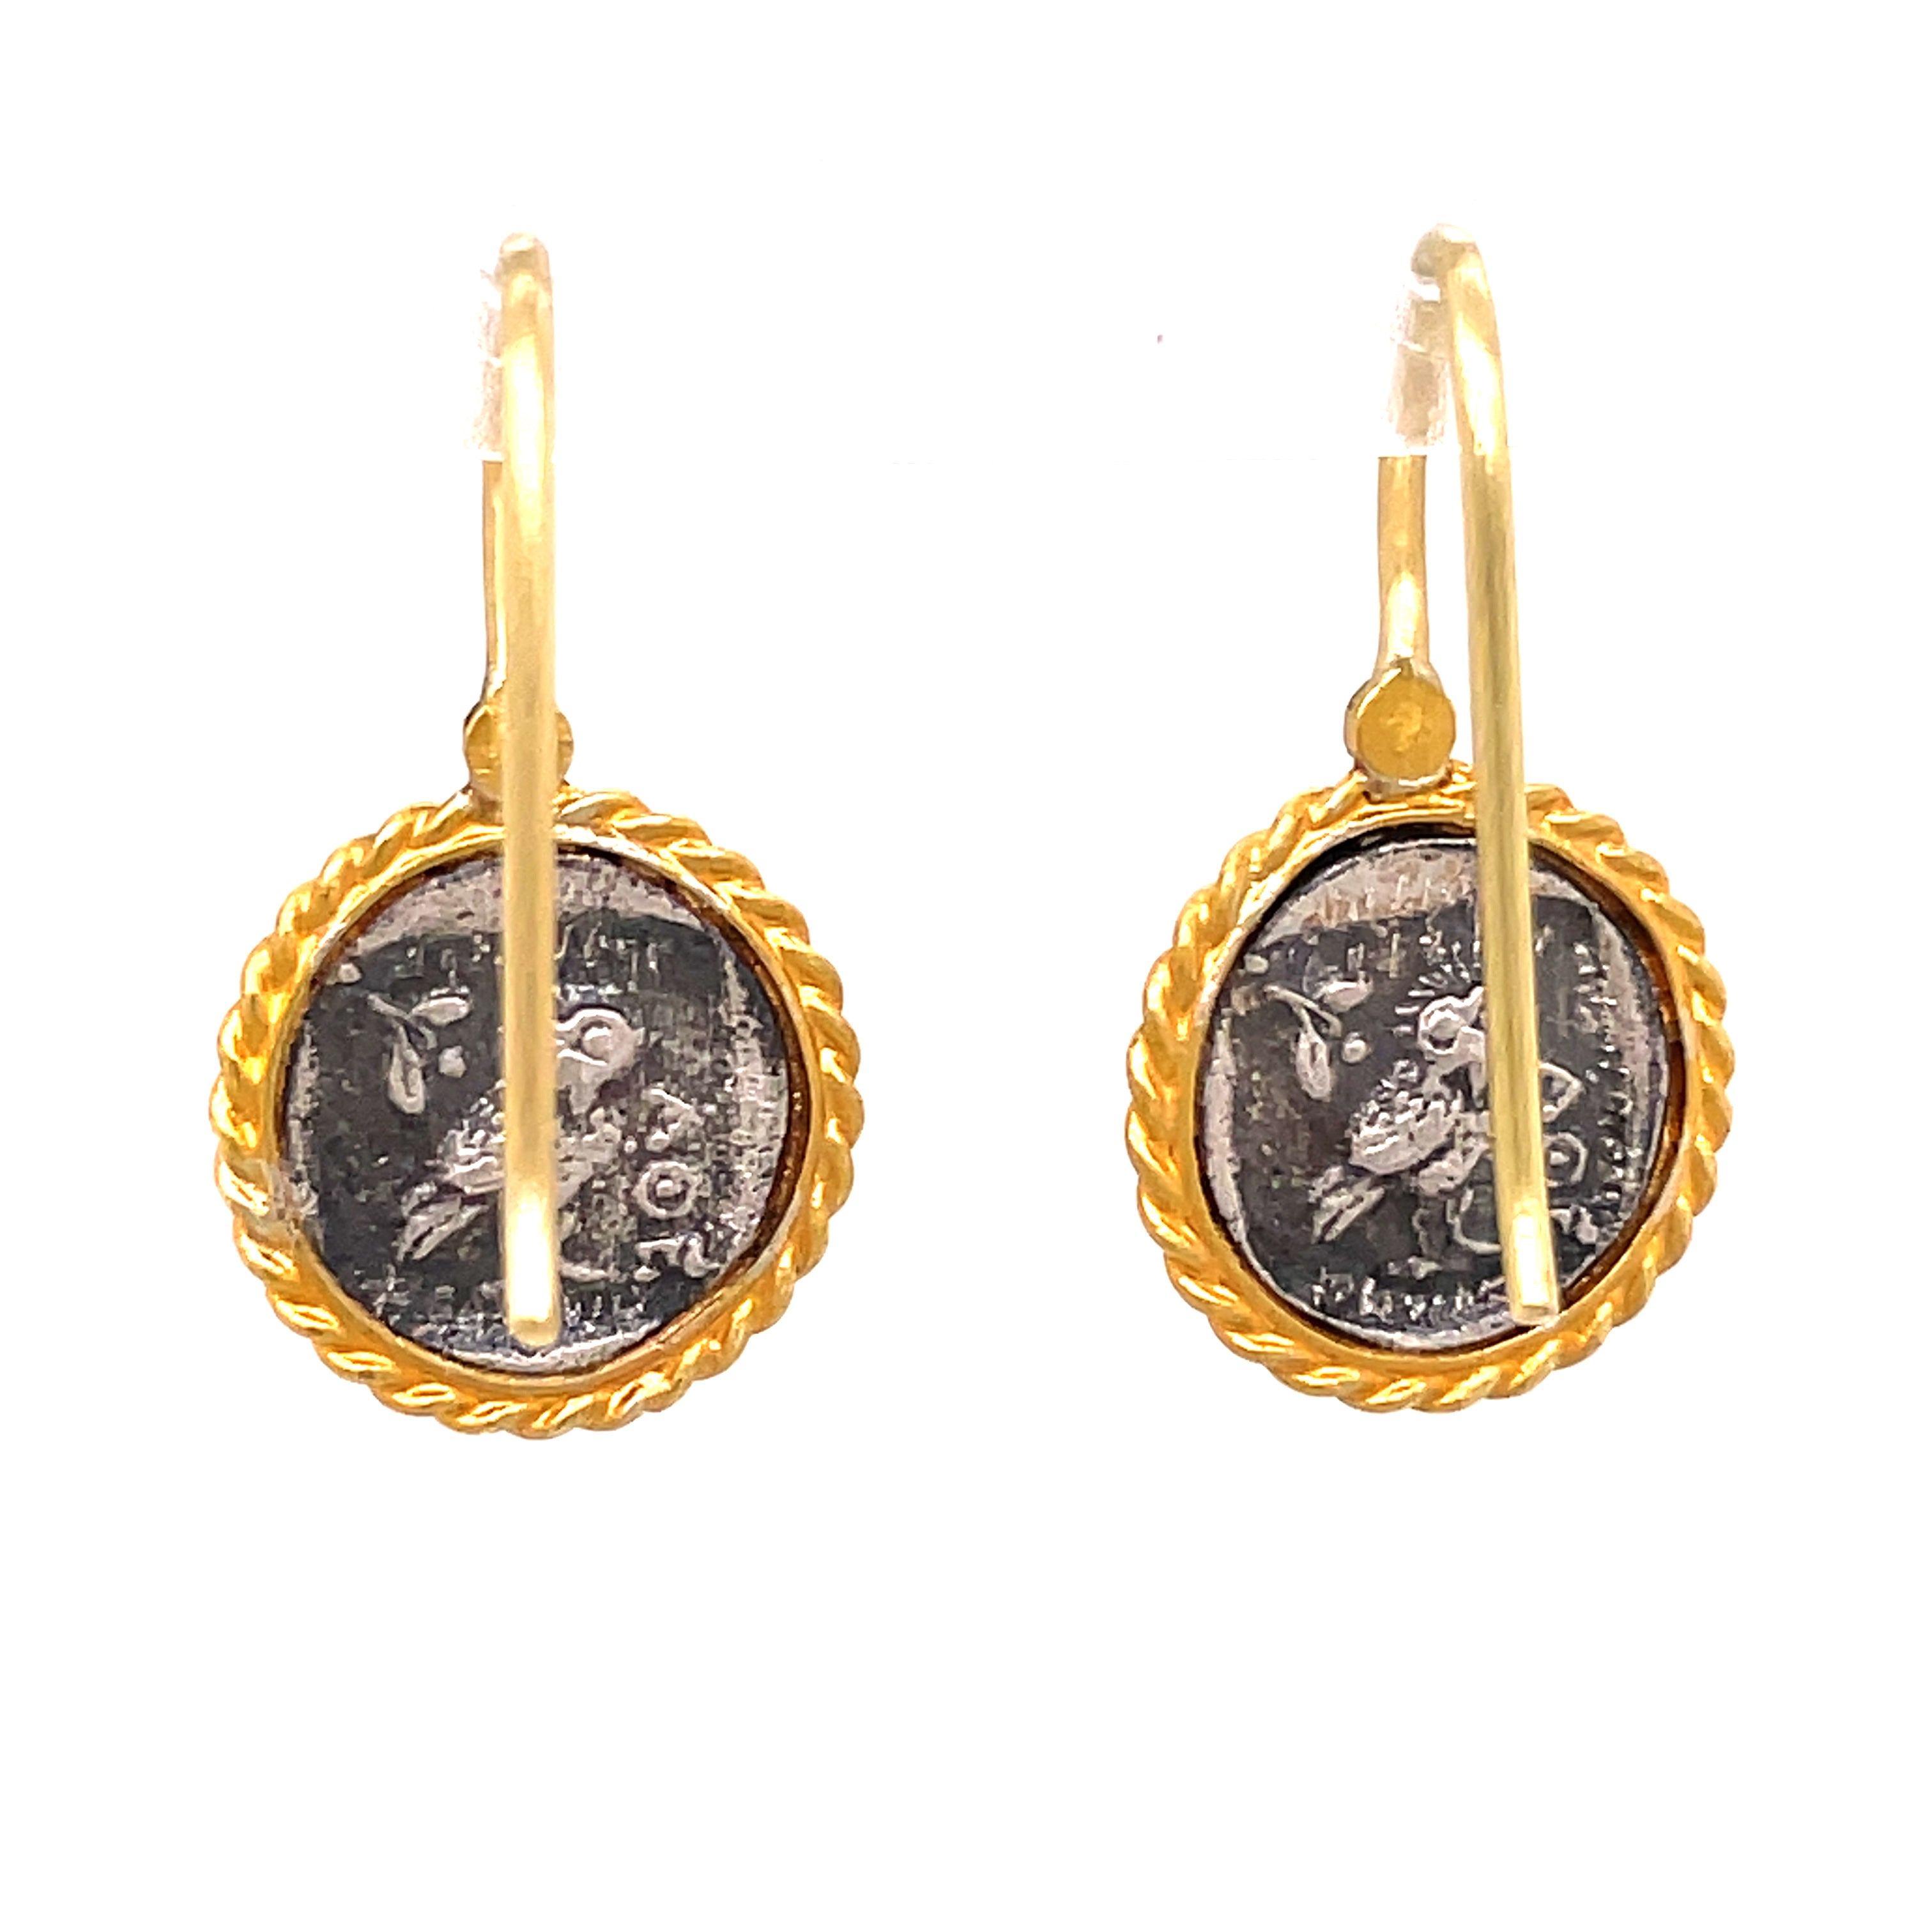 Made in Turkey, these Athena 24k Gold & Sterling Silver Coin Drop Earrings feature a round coin style, symbolizing wisdom and fertility. The hook wire system is highlighted by small round diamonds, while the earrings boast a matte finish. Oxidized sterling silver ensures long-lasting luxury.